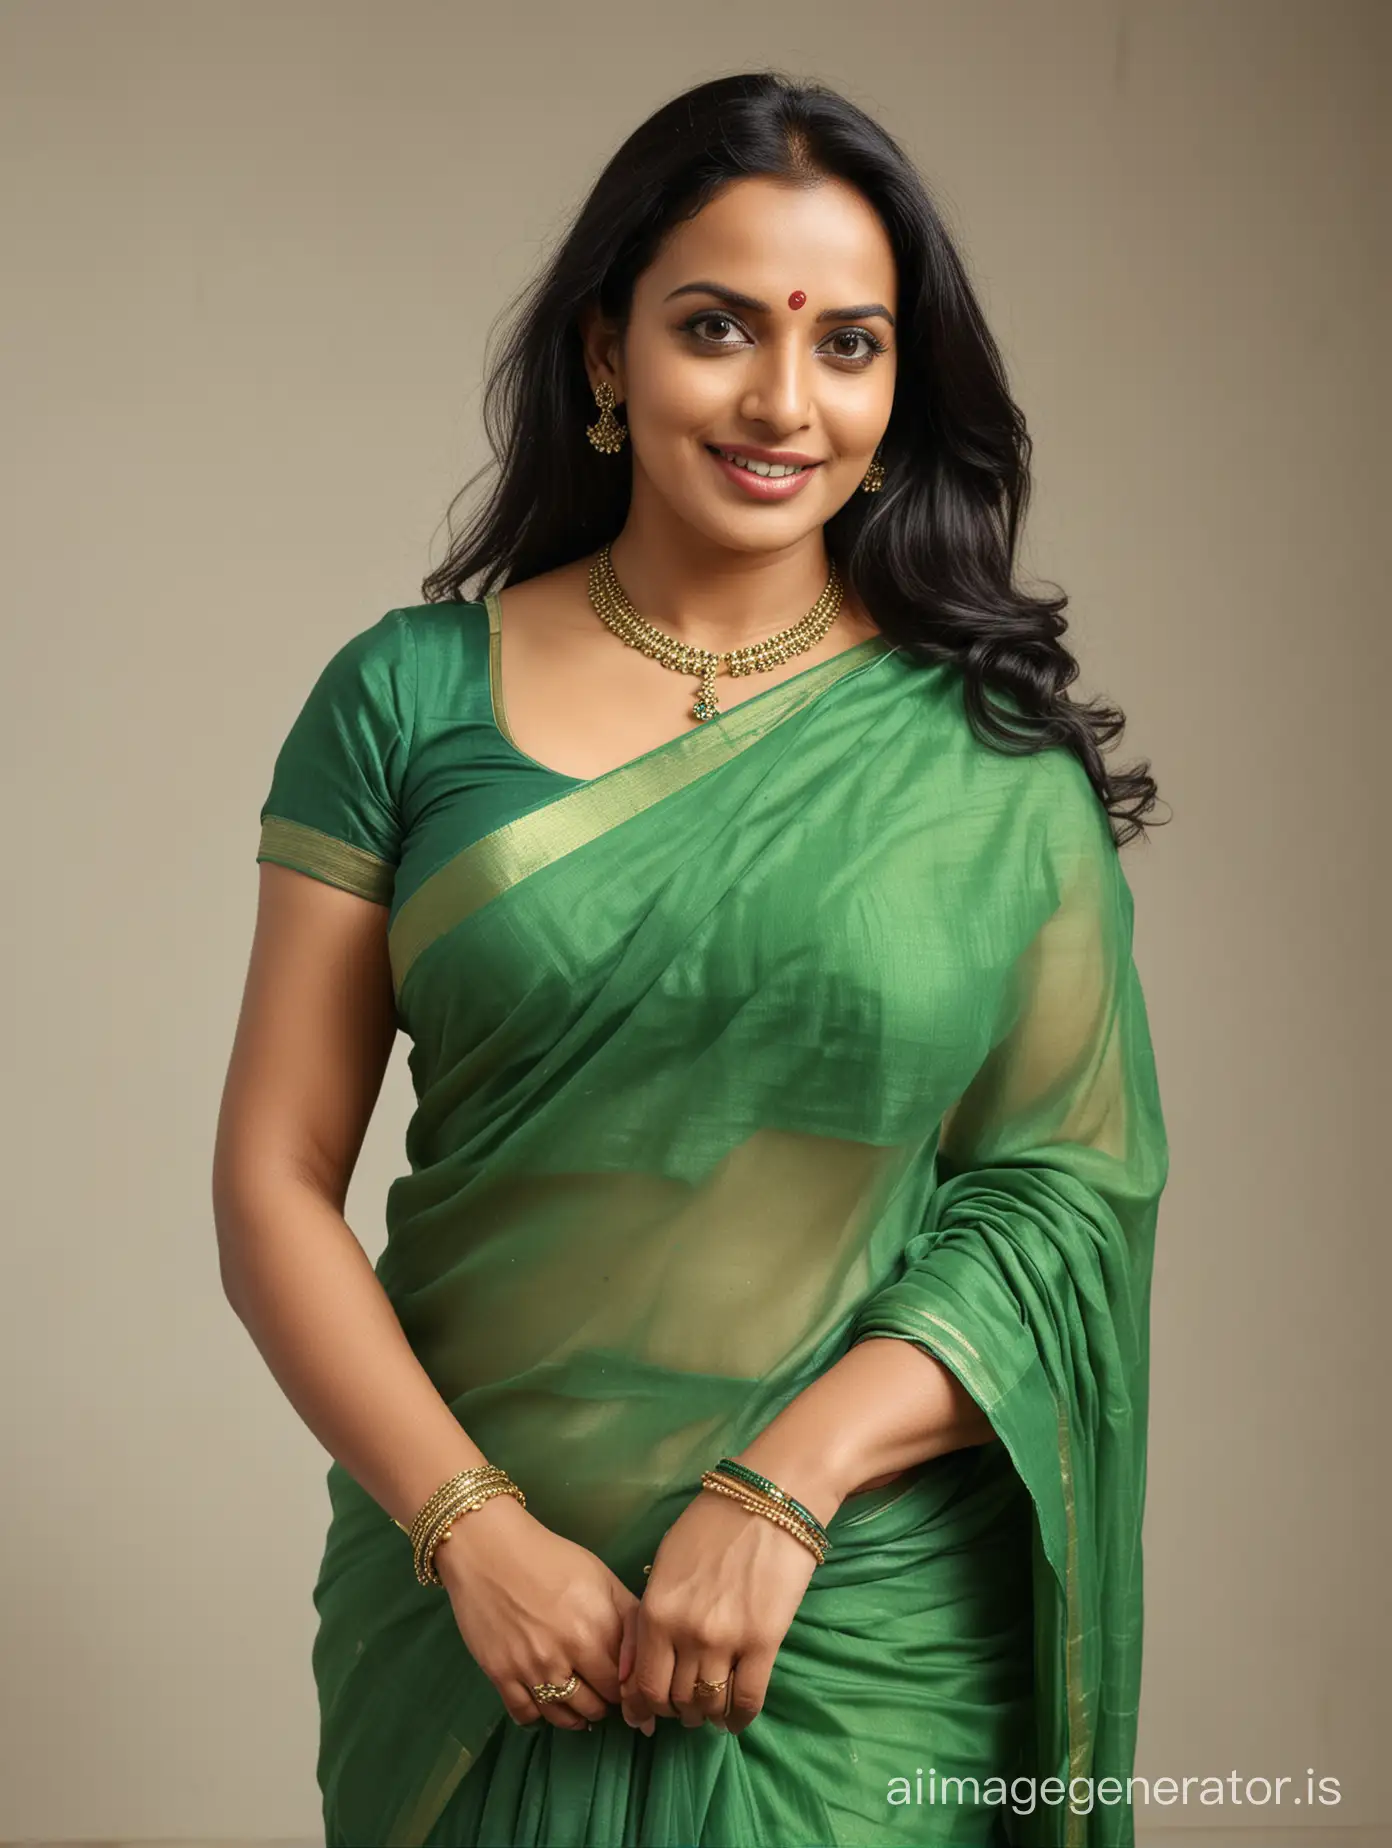 50YearOld-Kerala-Woman-in-Green-Saree-and-Mischievous-Smile